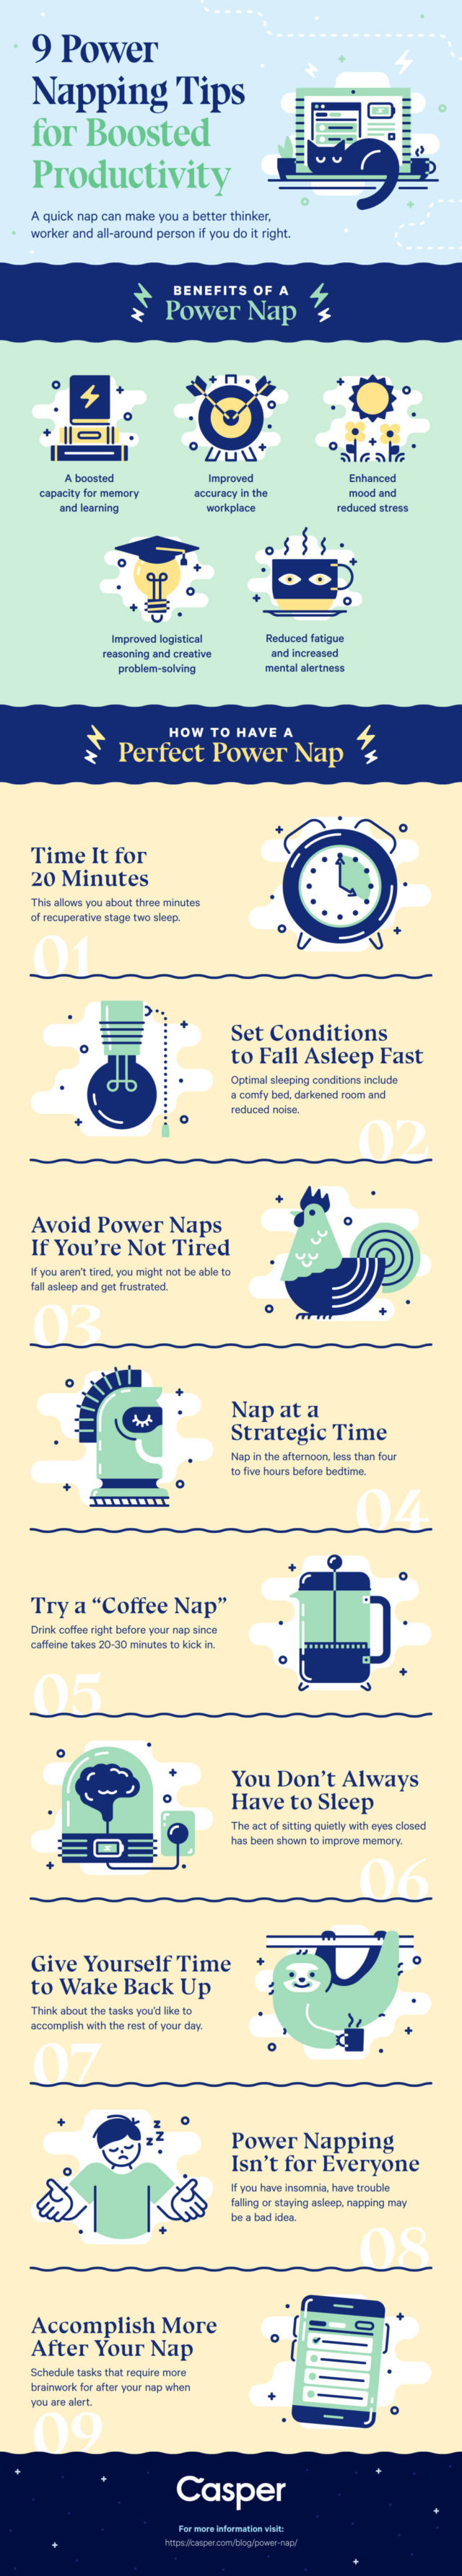 How to Power Nap